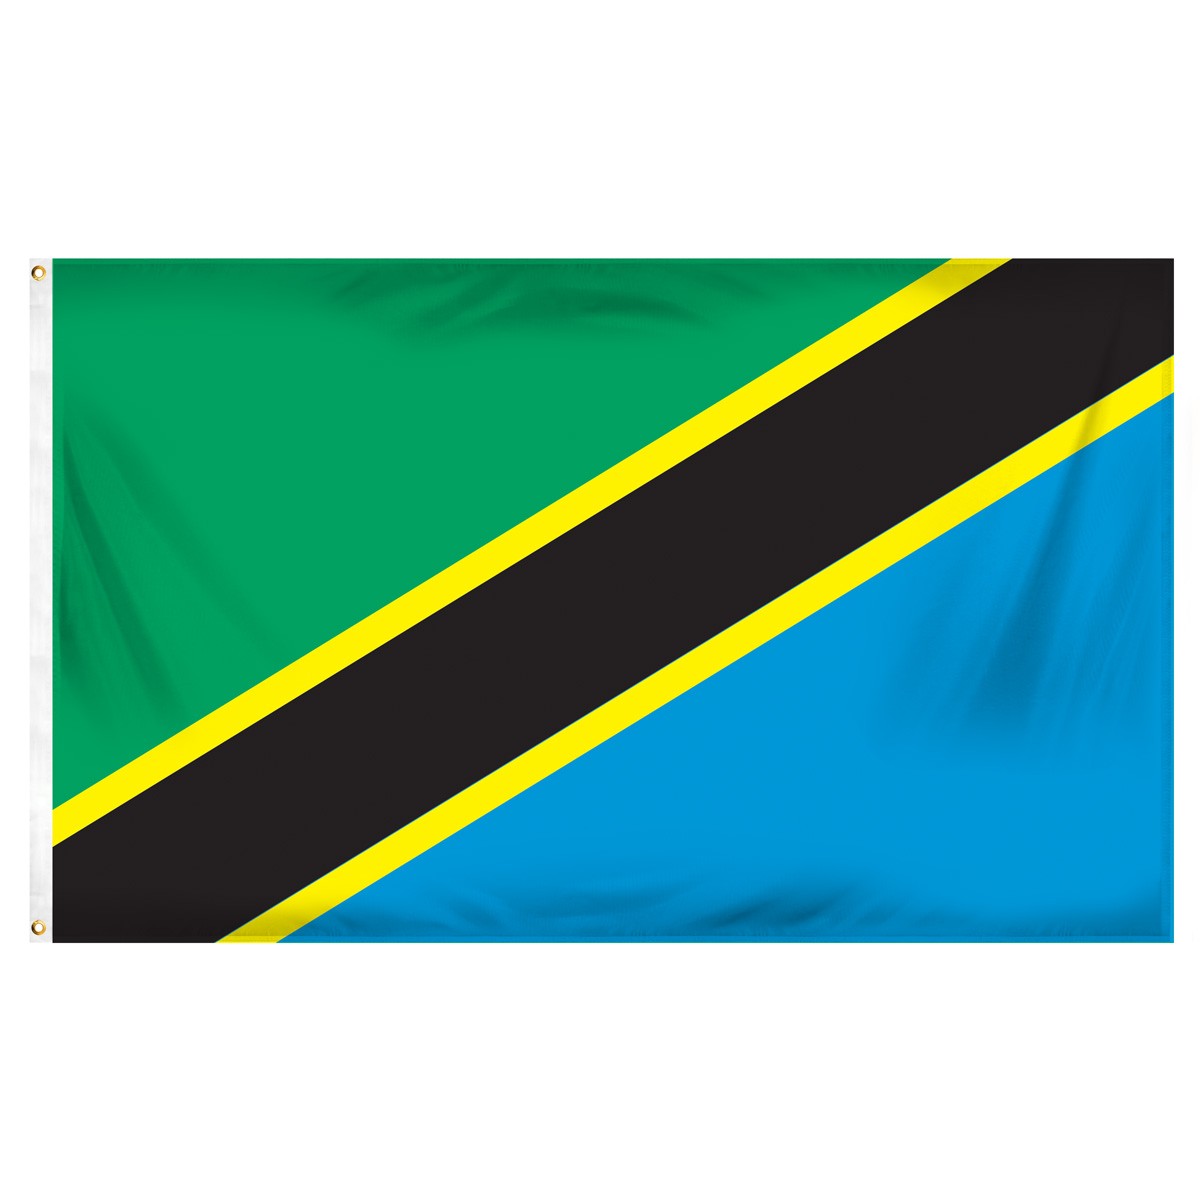 Tanzania Posters and Banners